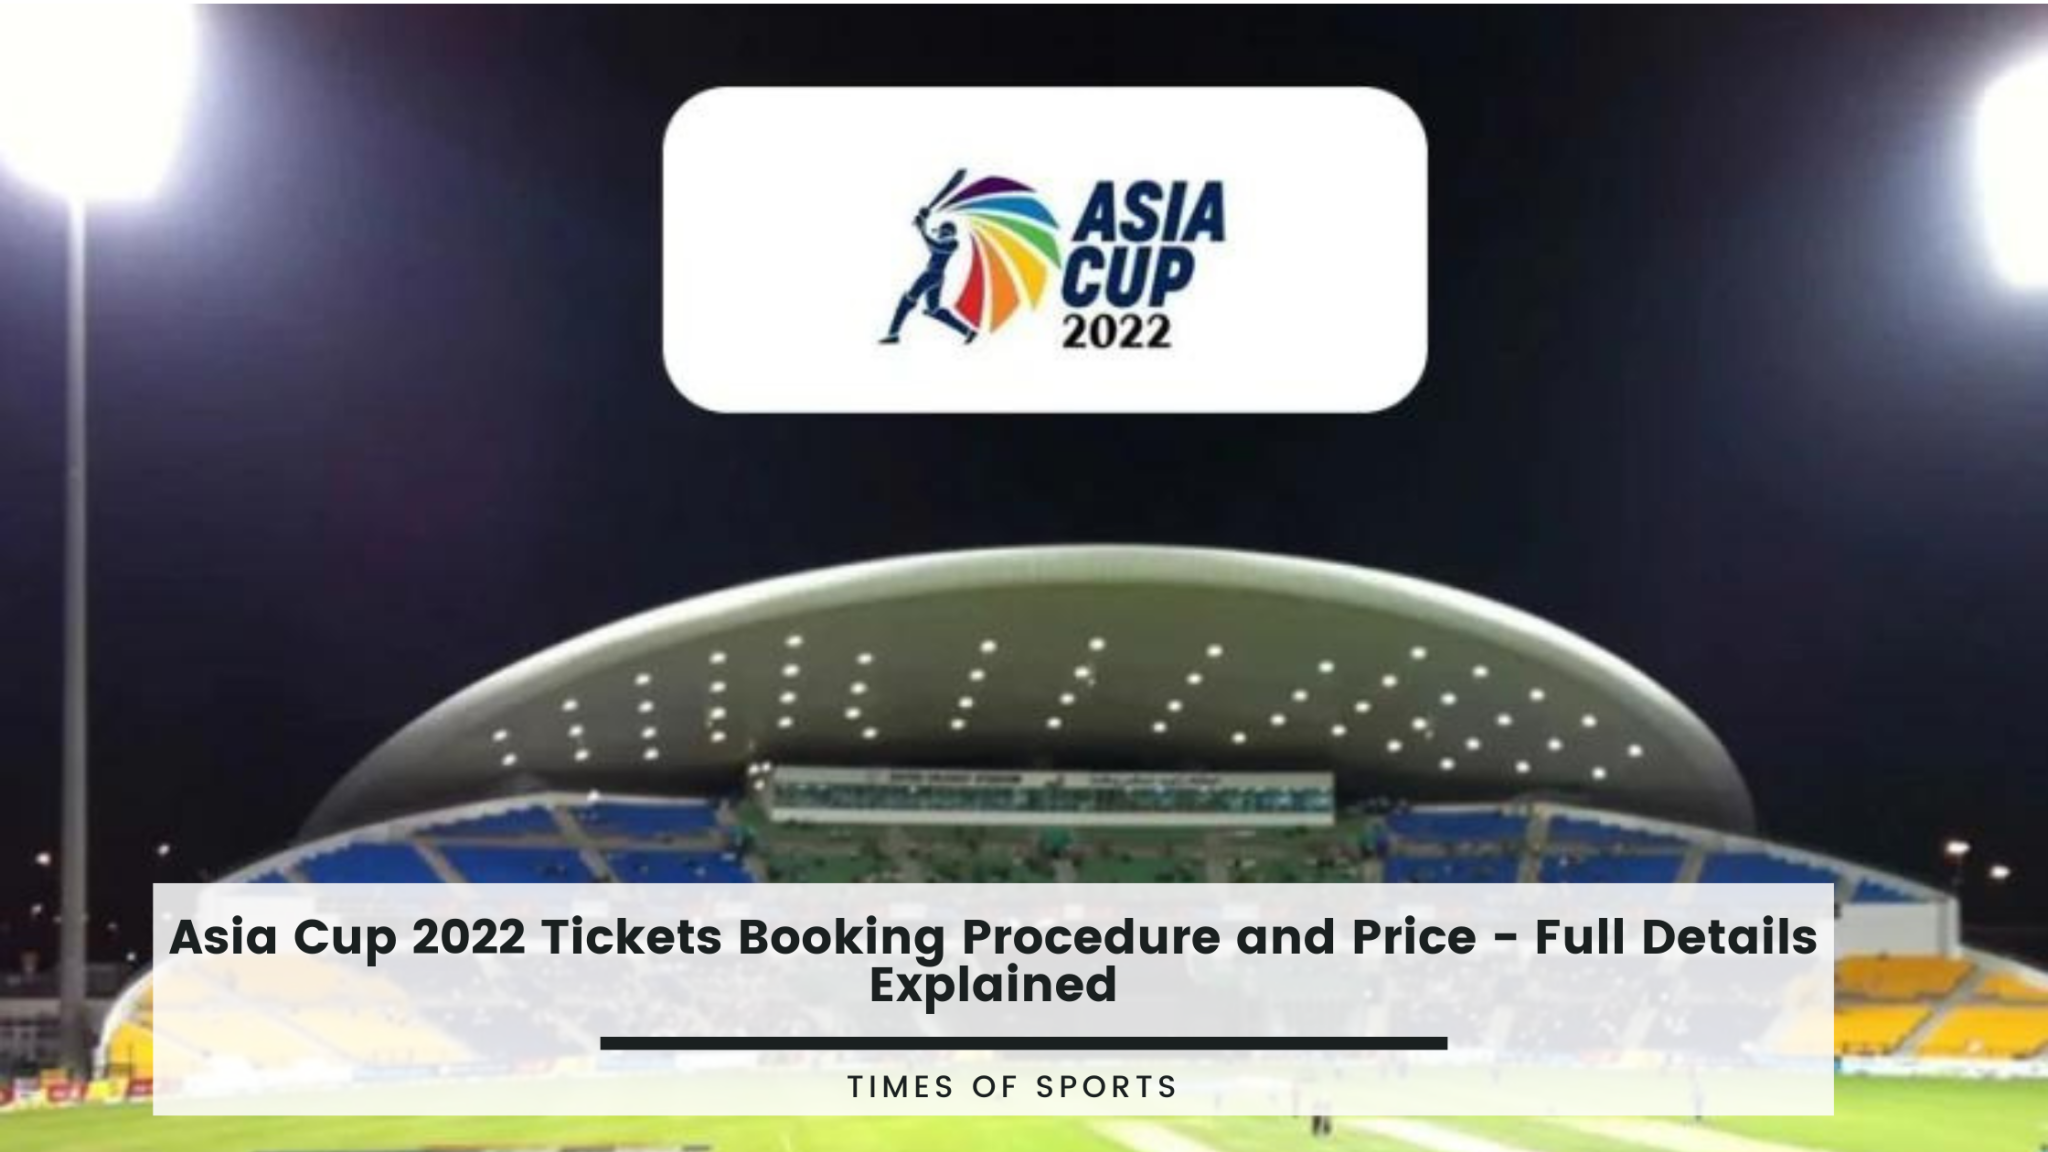 Asia Cup 2022 Tickets Booking Procedure and Price - Full Details Explained